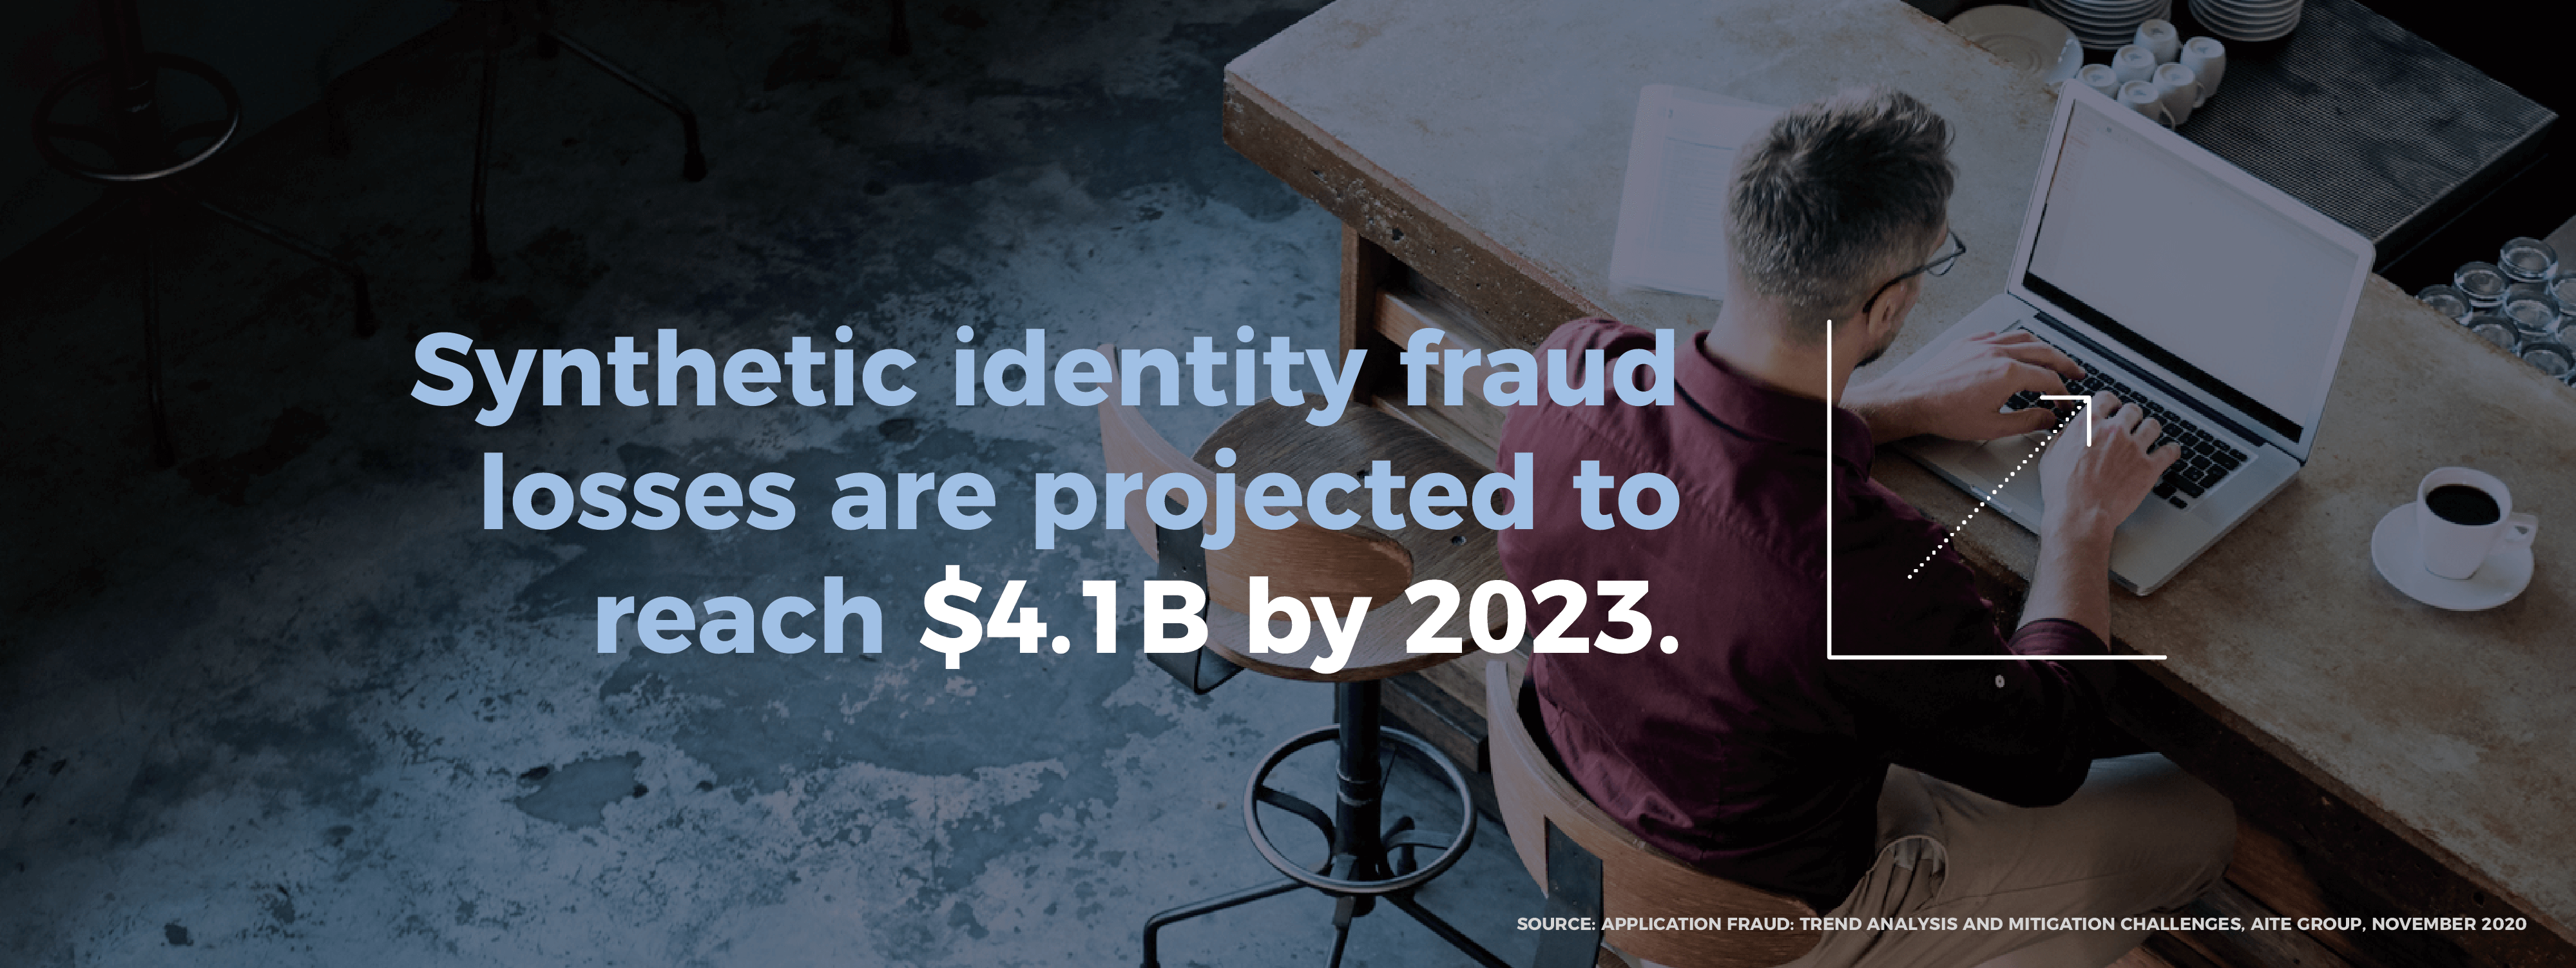 Synthetic identity fraud losses are projected by reach $4.1B by 2023